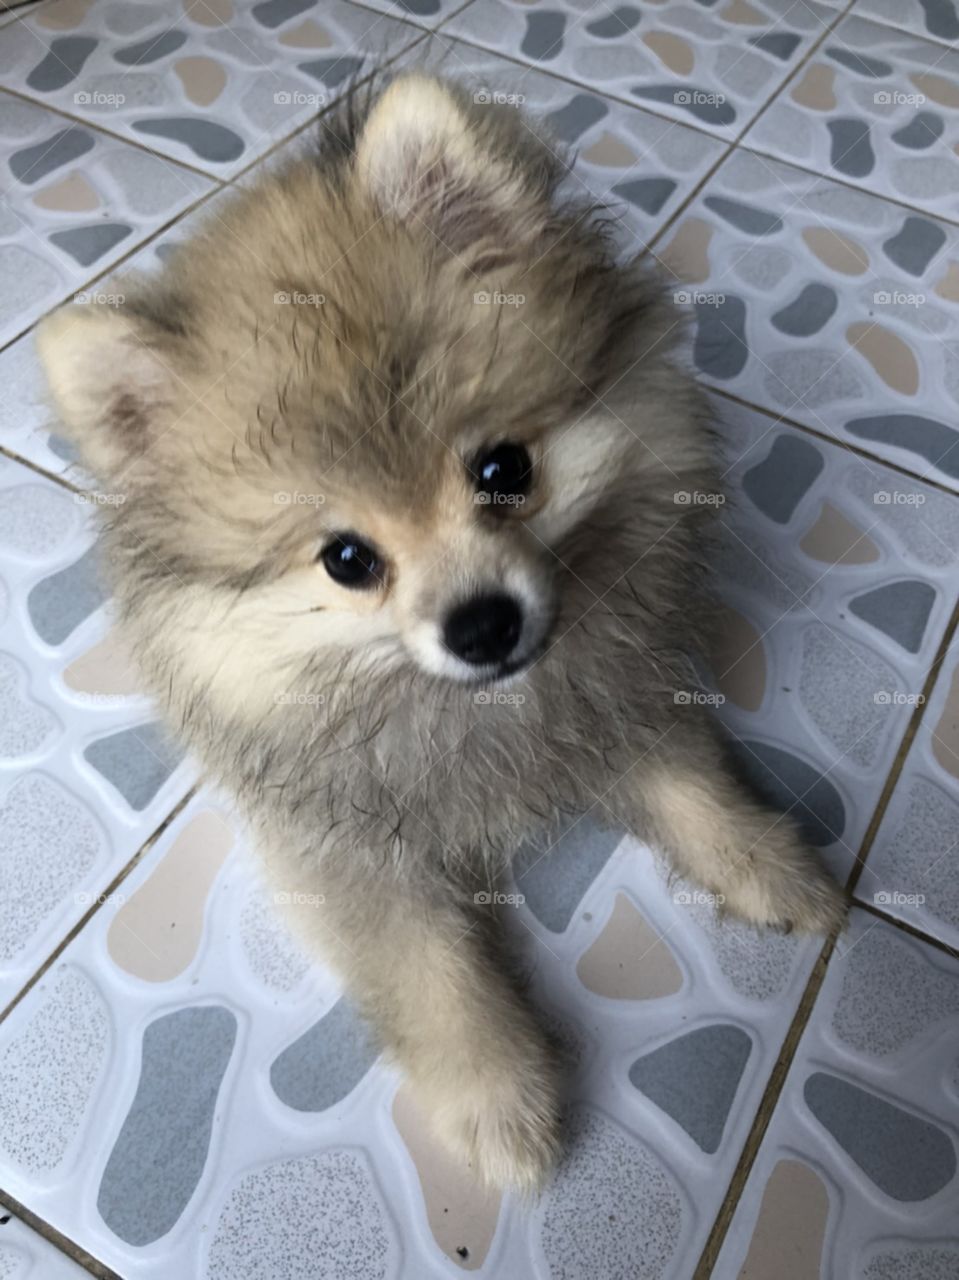 lovely puppy "pomeranian" is curious on the camera of mobile phone.